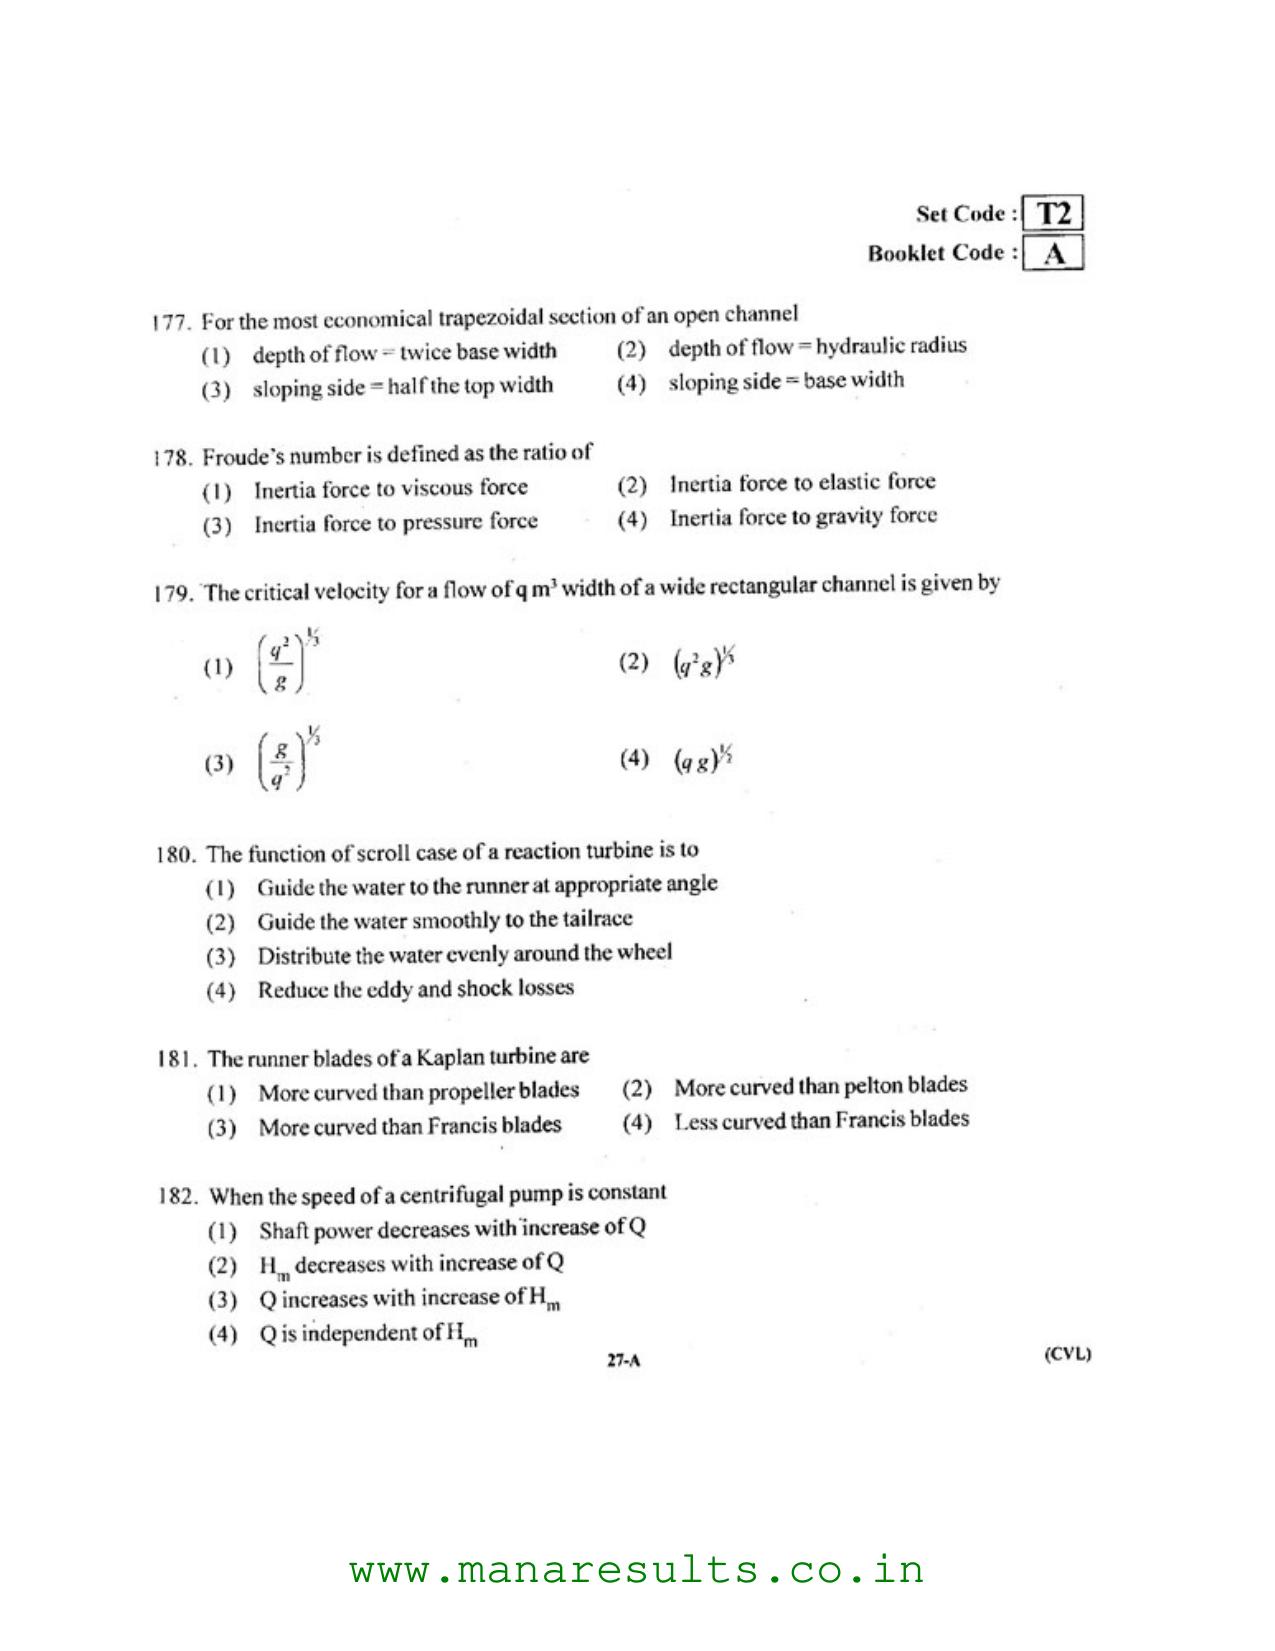 AP ECET 2016 Civil Engineering Old Previous Question Papers - Page 26